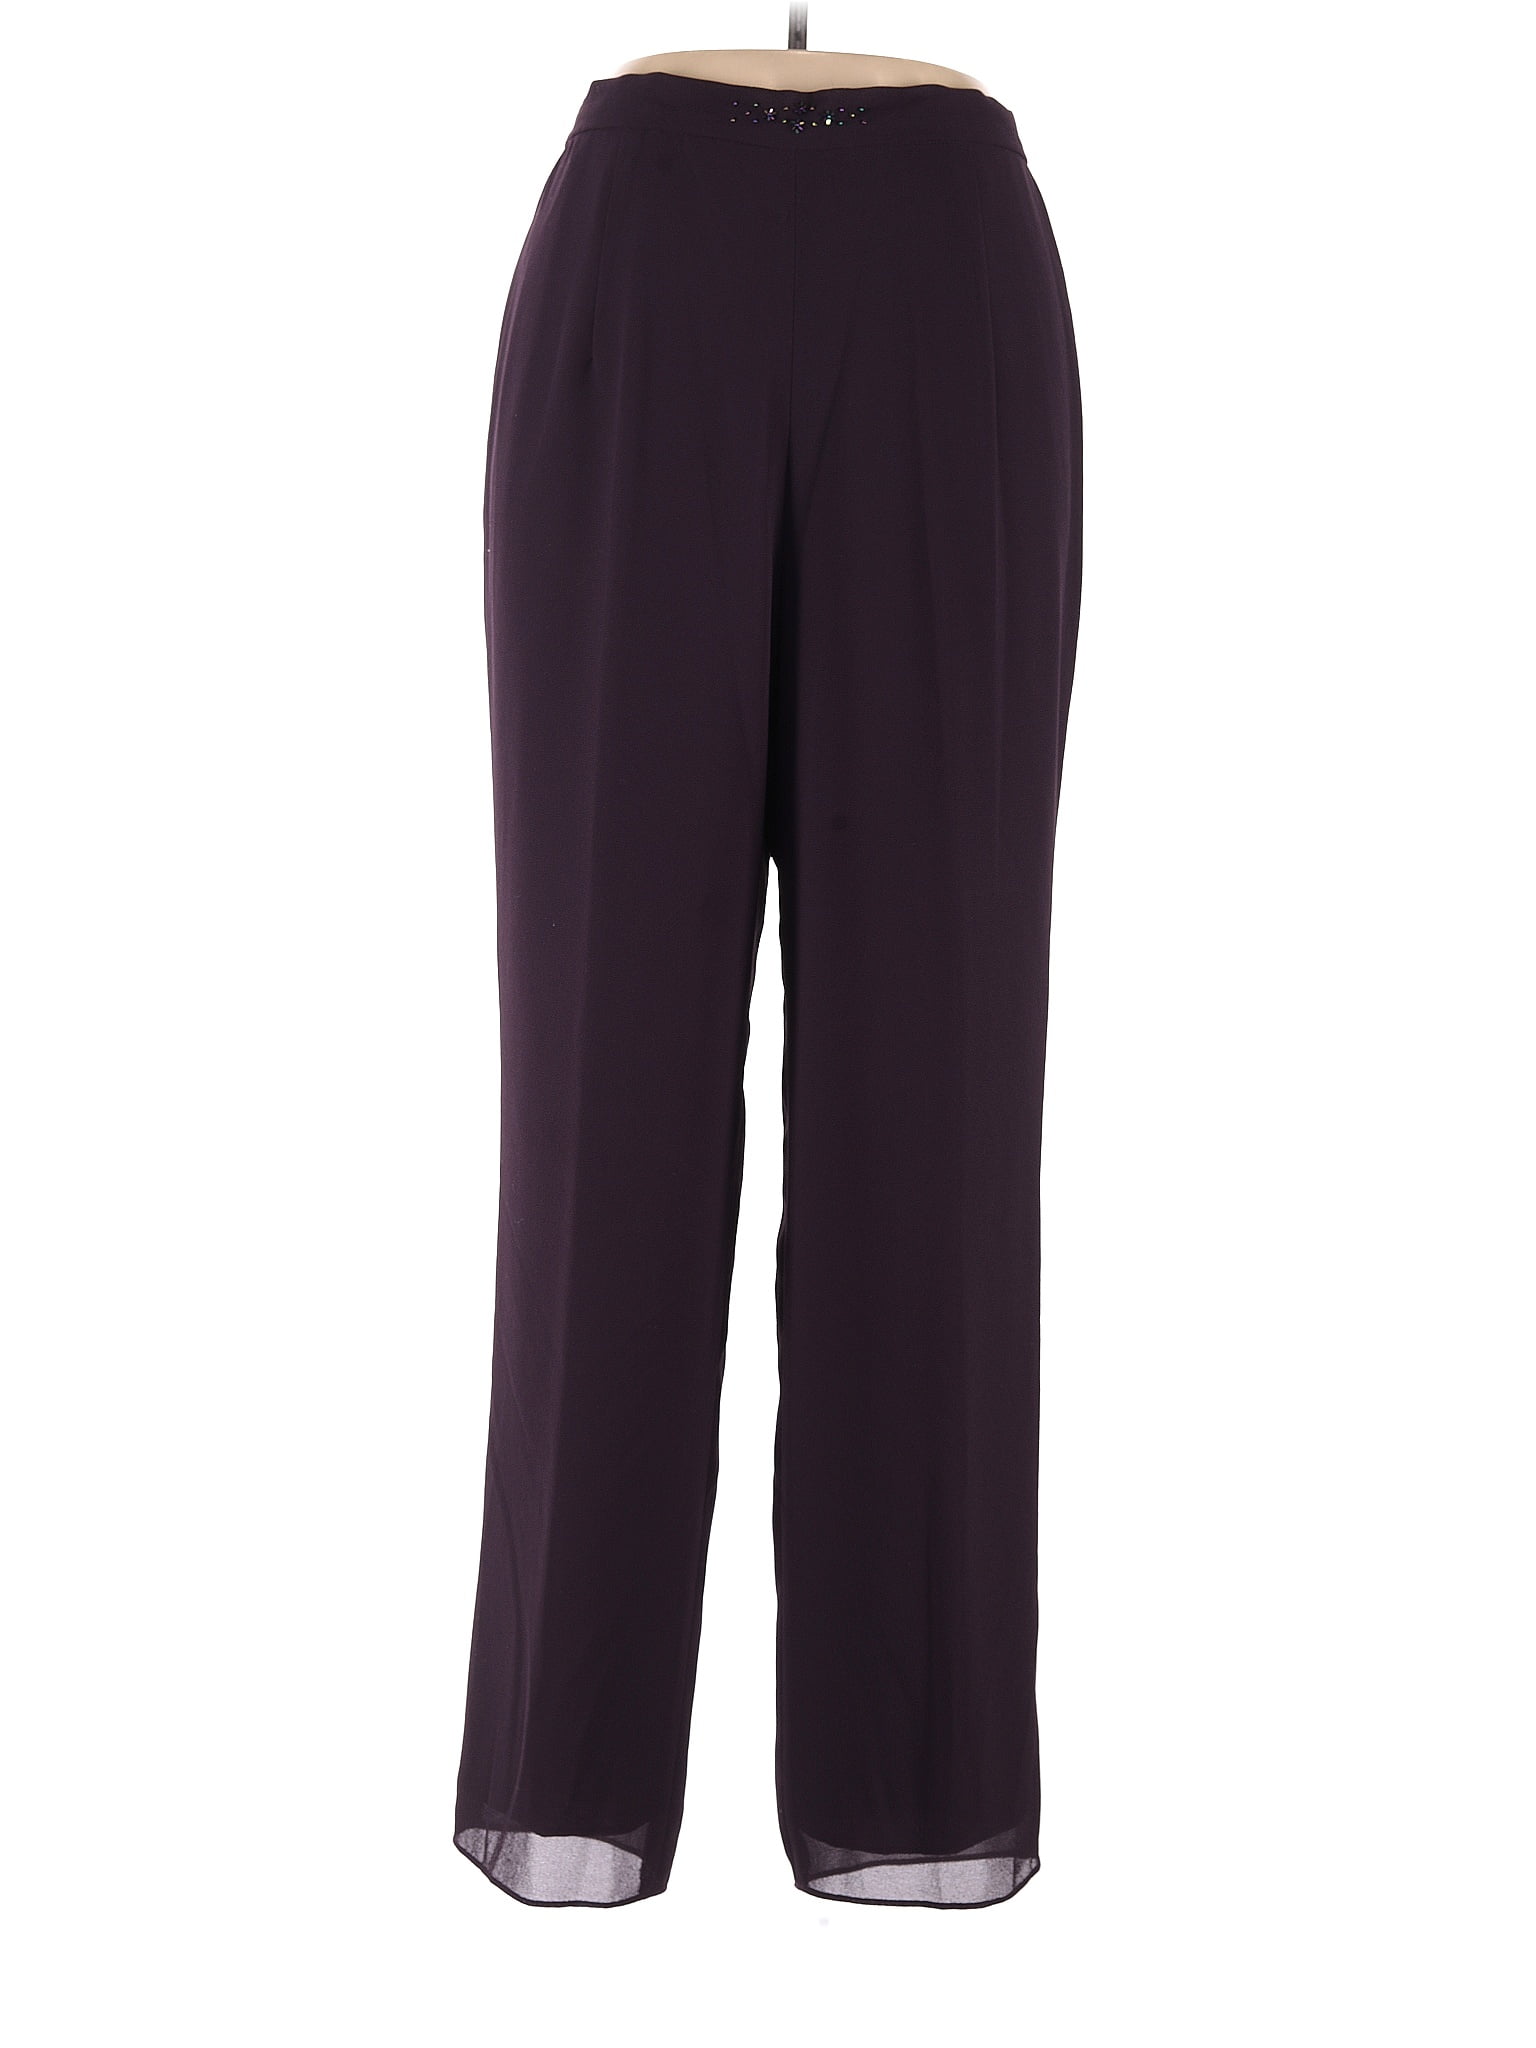 R&M Richards 100% Polyester Solid Purple Dress Pants Size 14 - 79% off